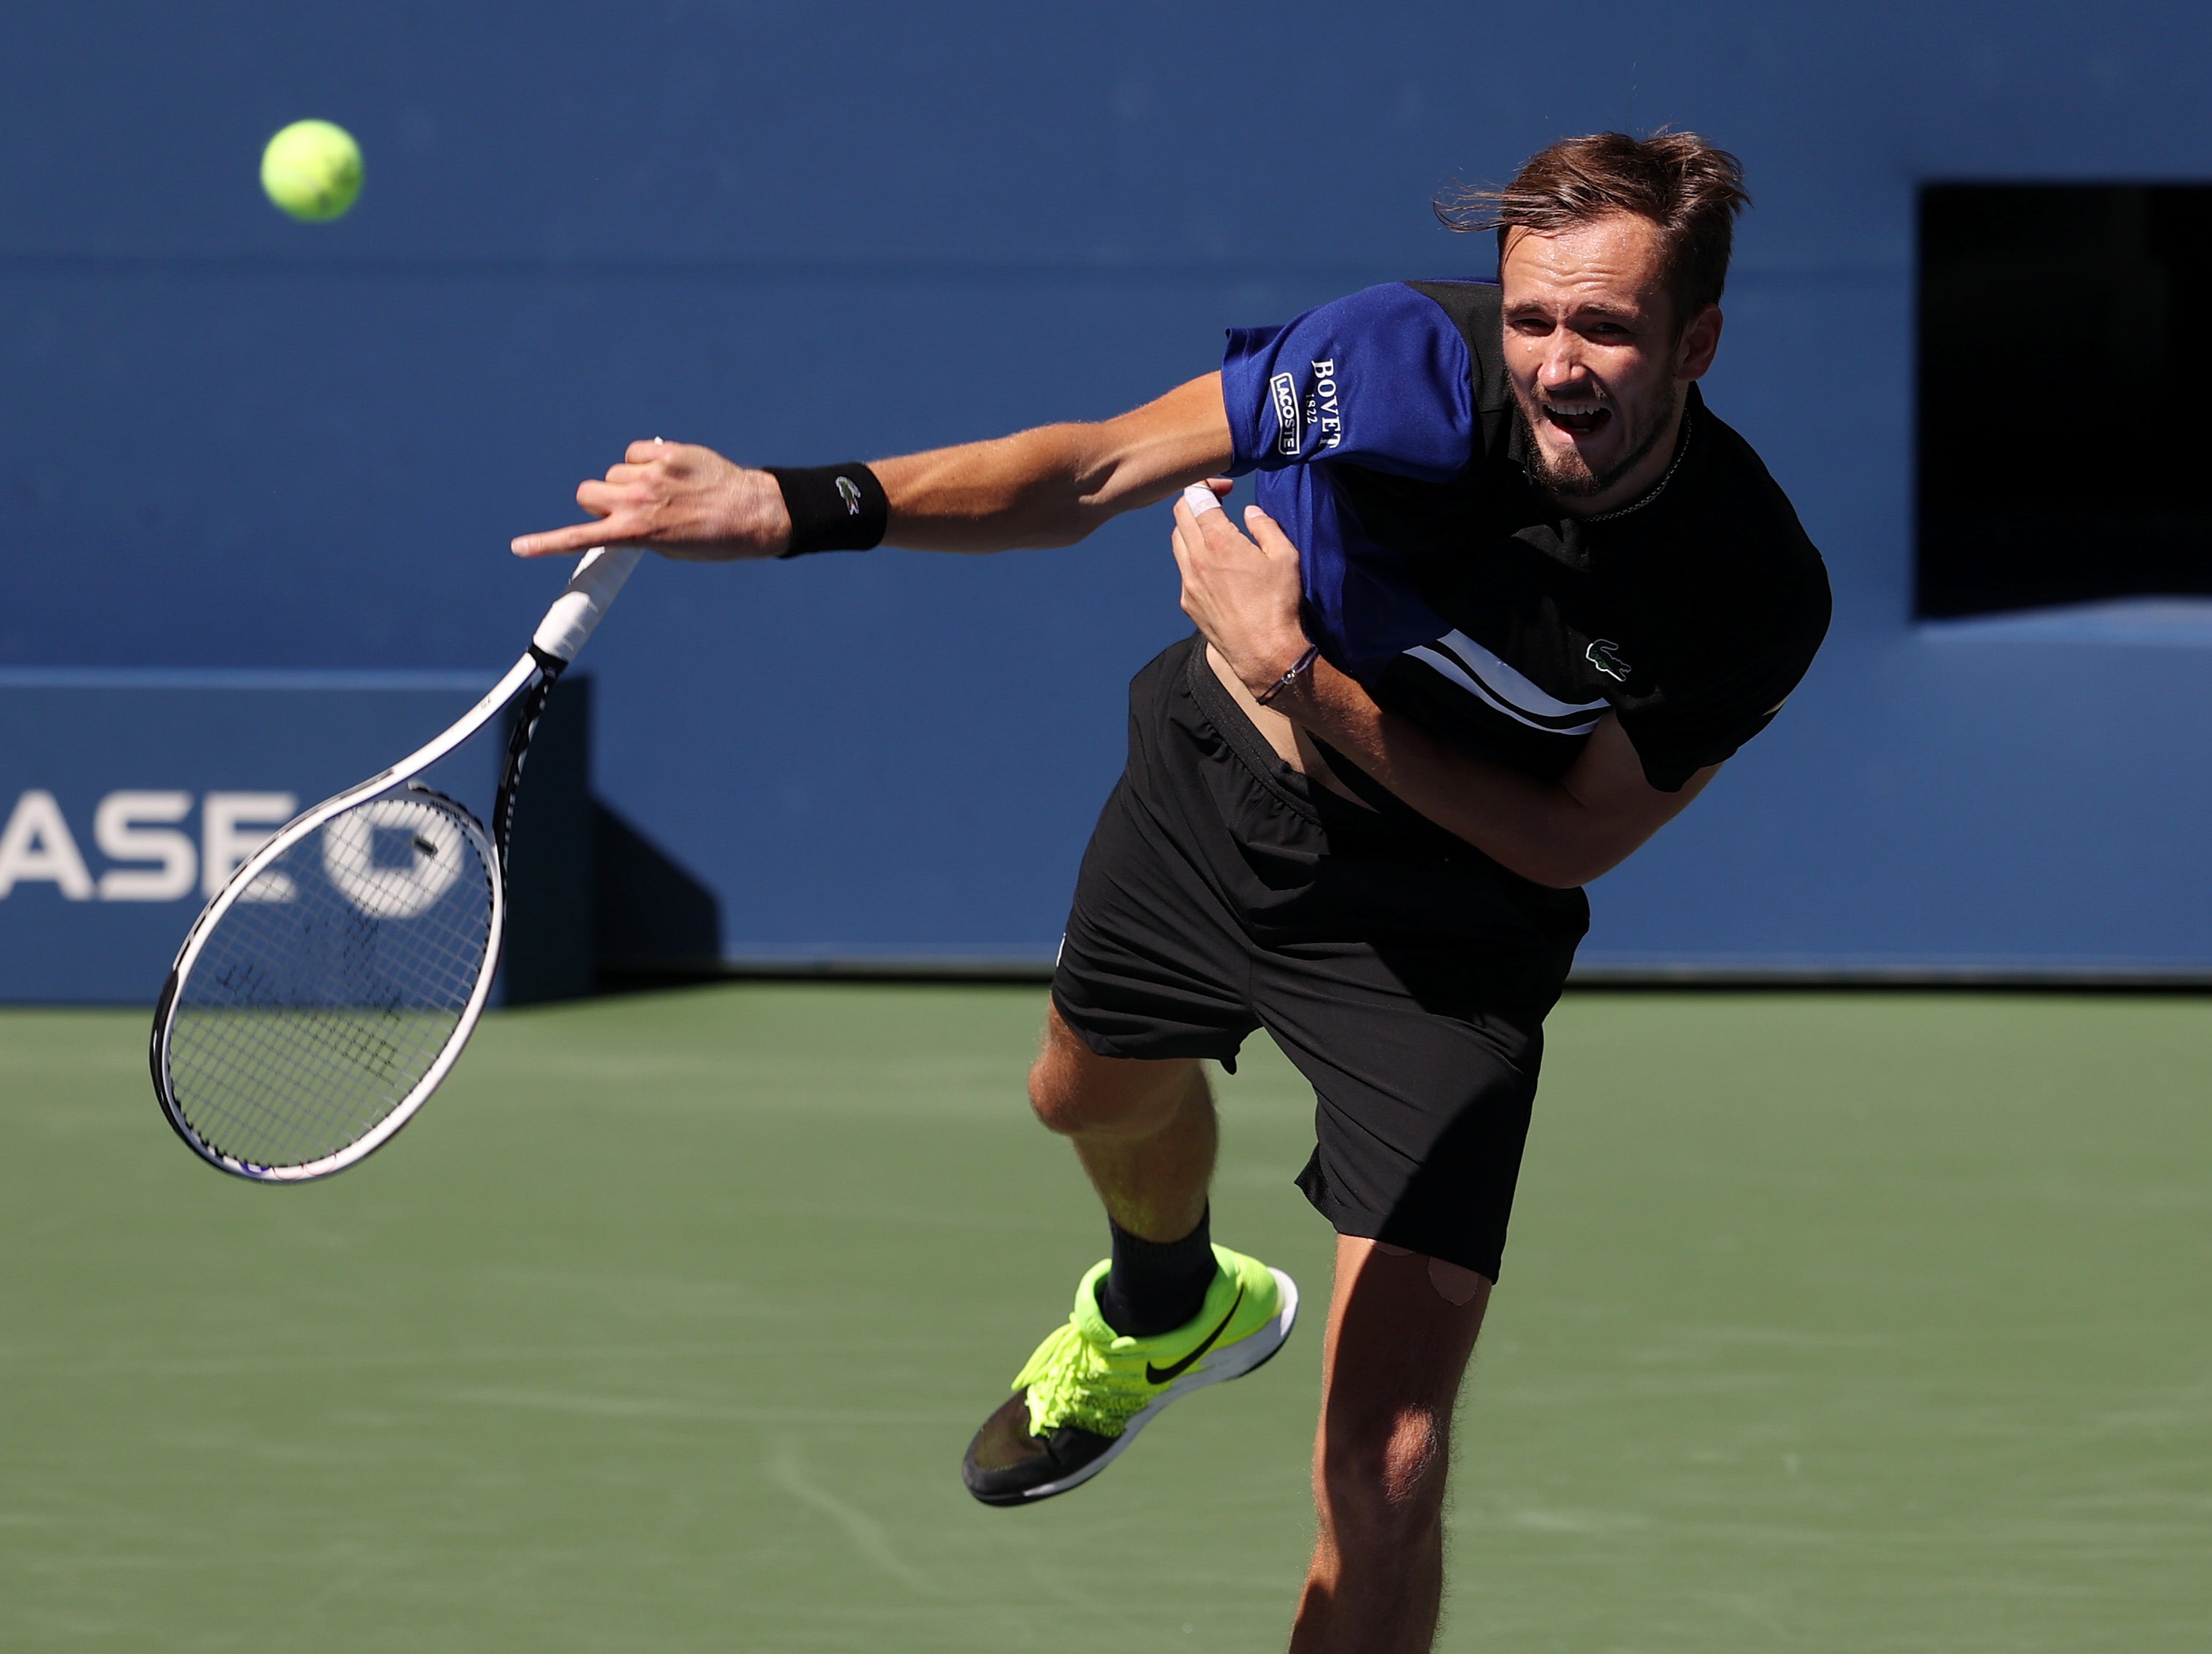 Daniil Medvedev finished as runner-up at the 2019 US Open